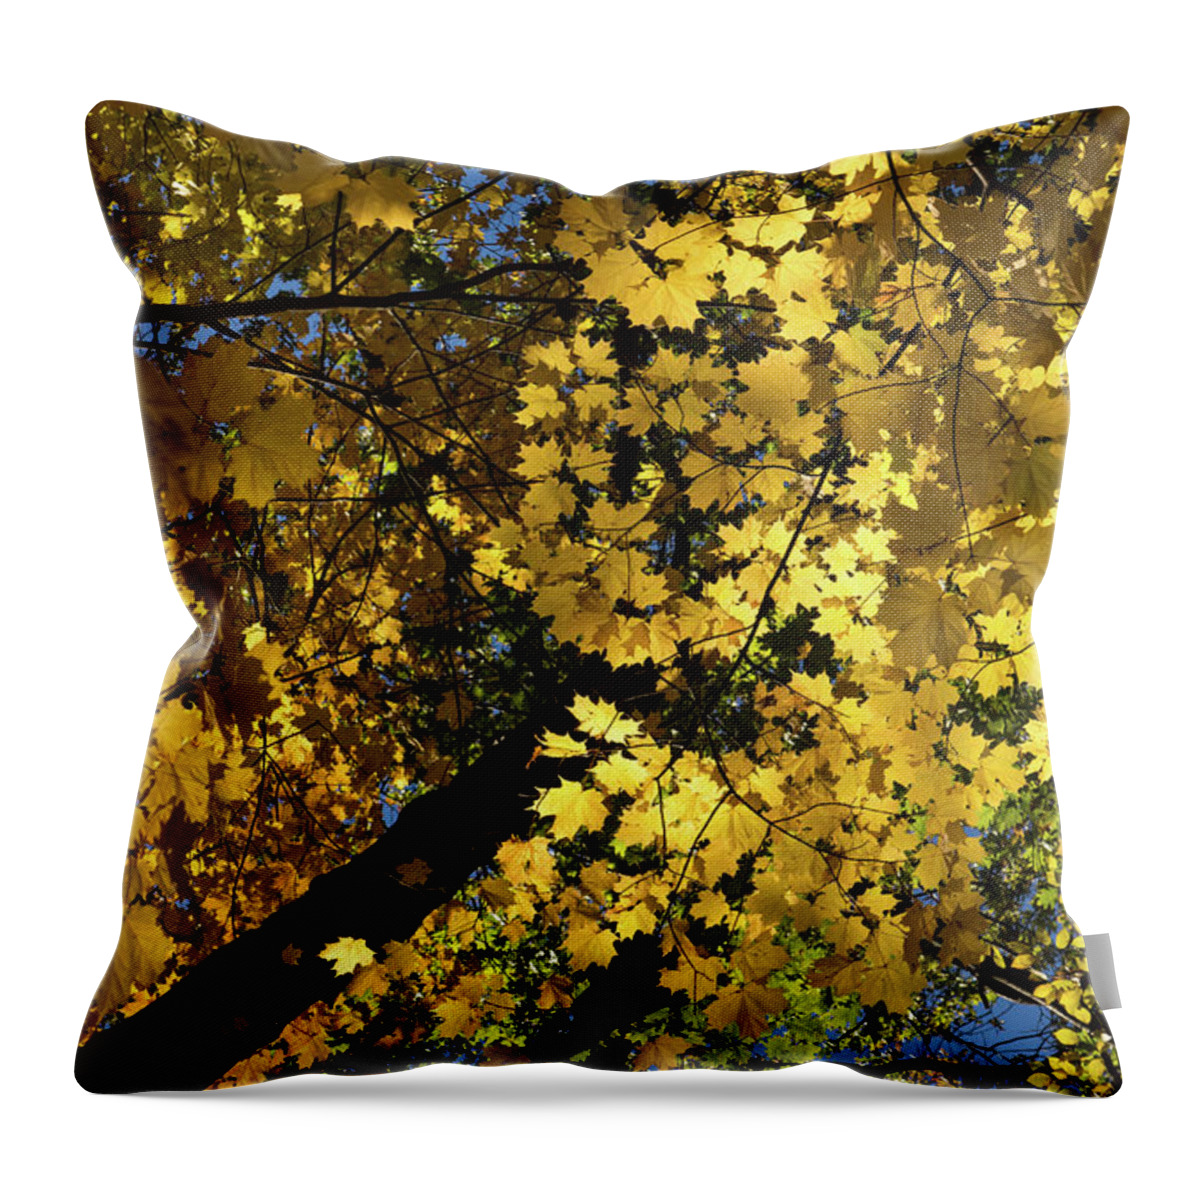 Golden Canopy Throw Pillow featuring the photograph Golden Canopy - Look Up to the Trees and Enjoy Autumn - Vertical Left by Georgia Mizuleva